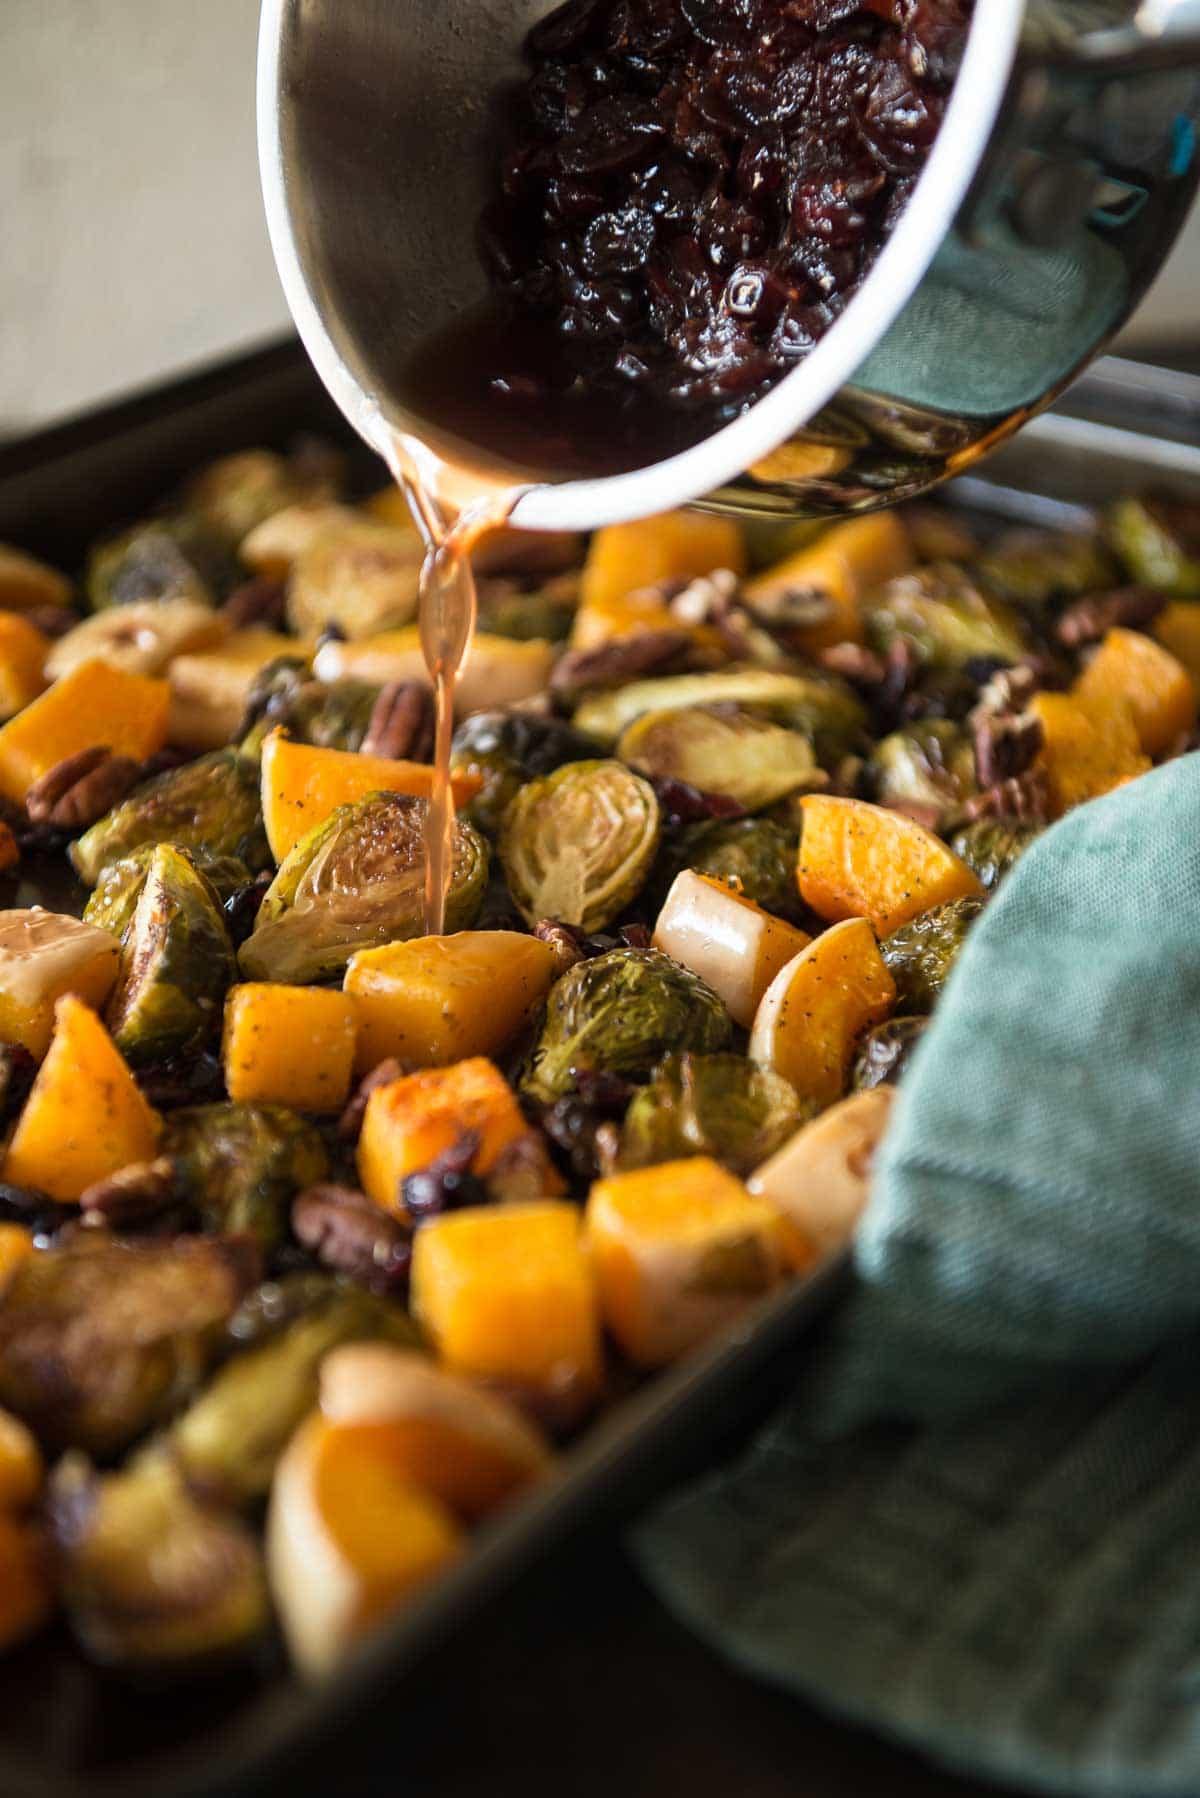 Caramelized veggies, roasted with pecans and tossed with a sweet and tangy glaze - these Roasted Brussels Sprouts & Squash With Cranberry Cider Glaze might be the perfect holiday side dish! 